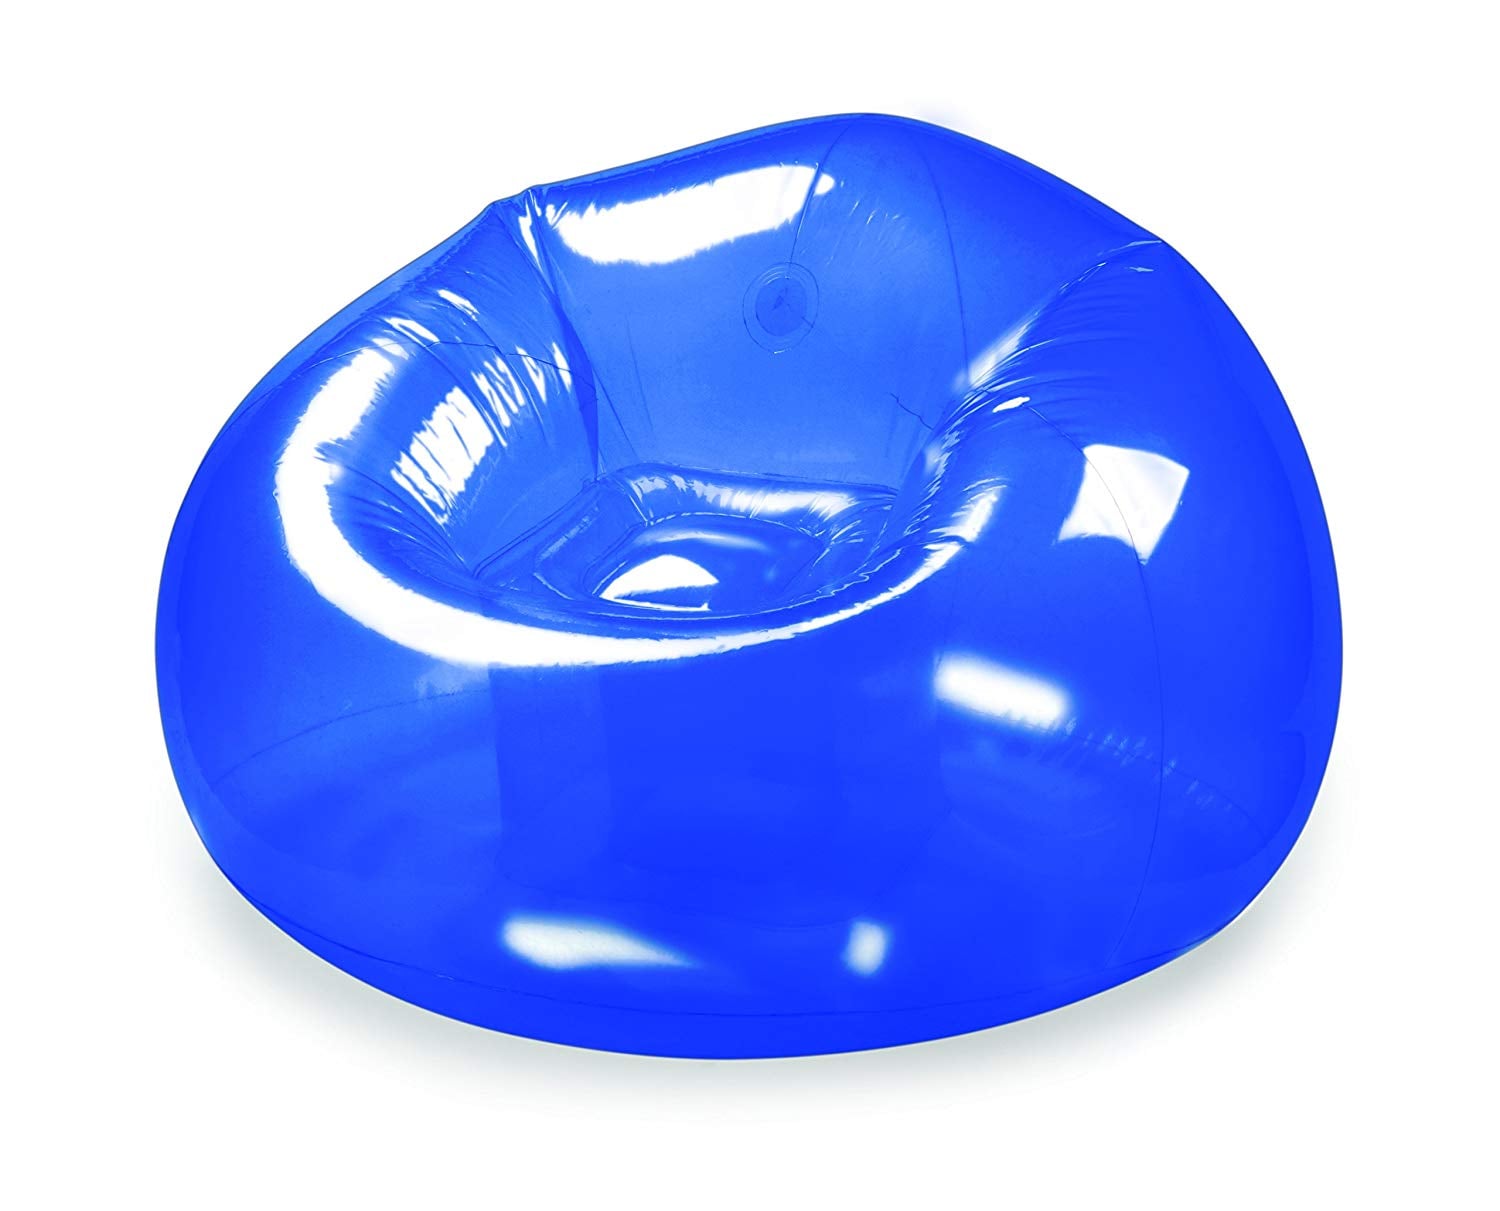 Inflatable Chairs You Can Buy Online Popsugar Home